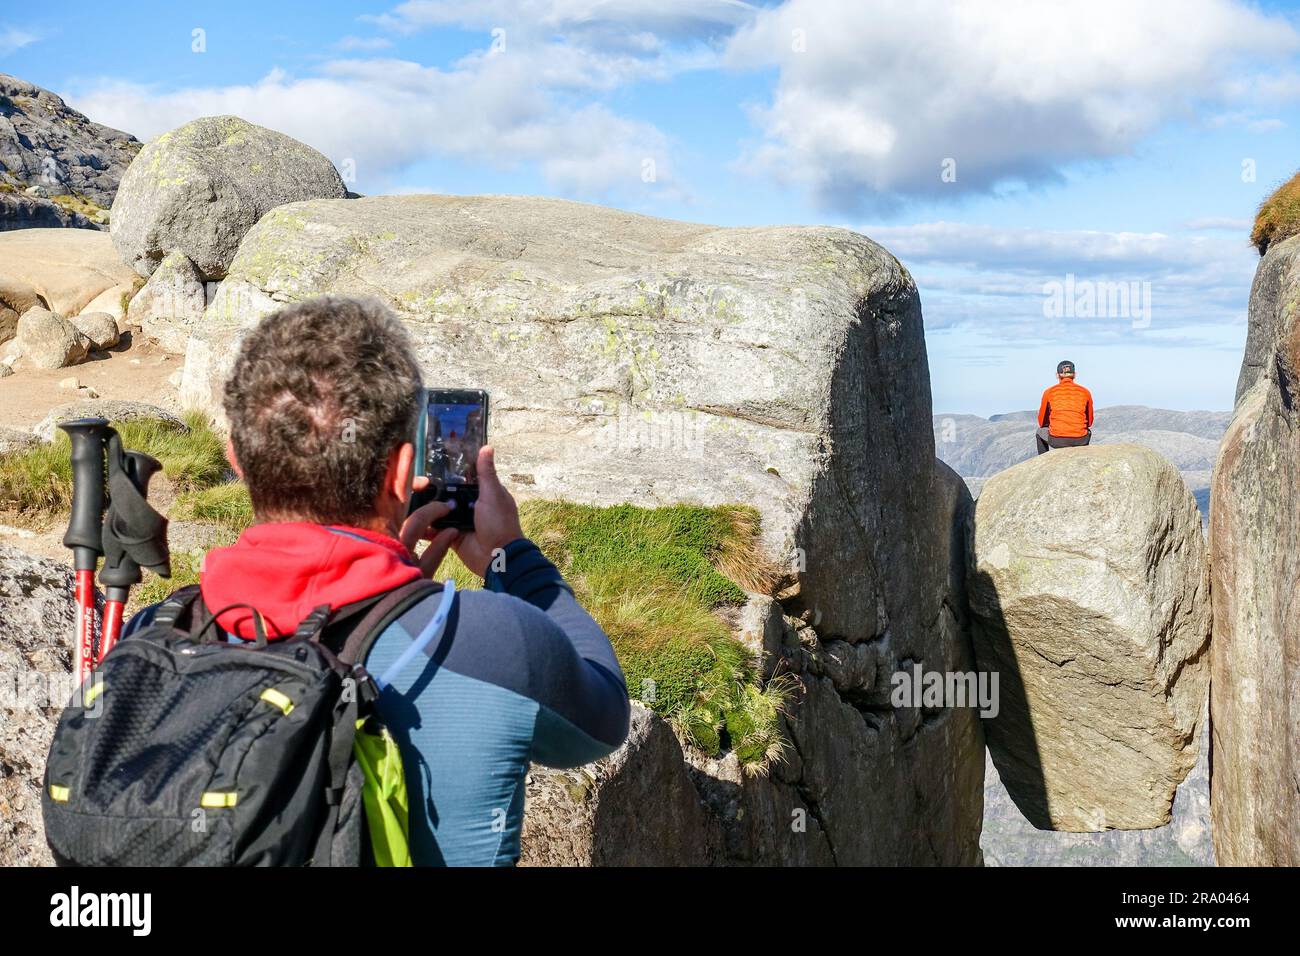 Hiker taking a photo of another hiker sitting on the Kjerag boulder, Norway Stock Photo